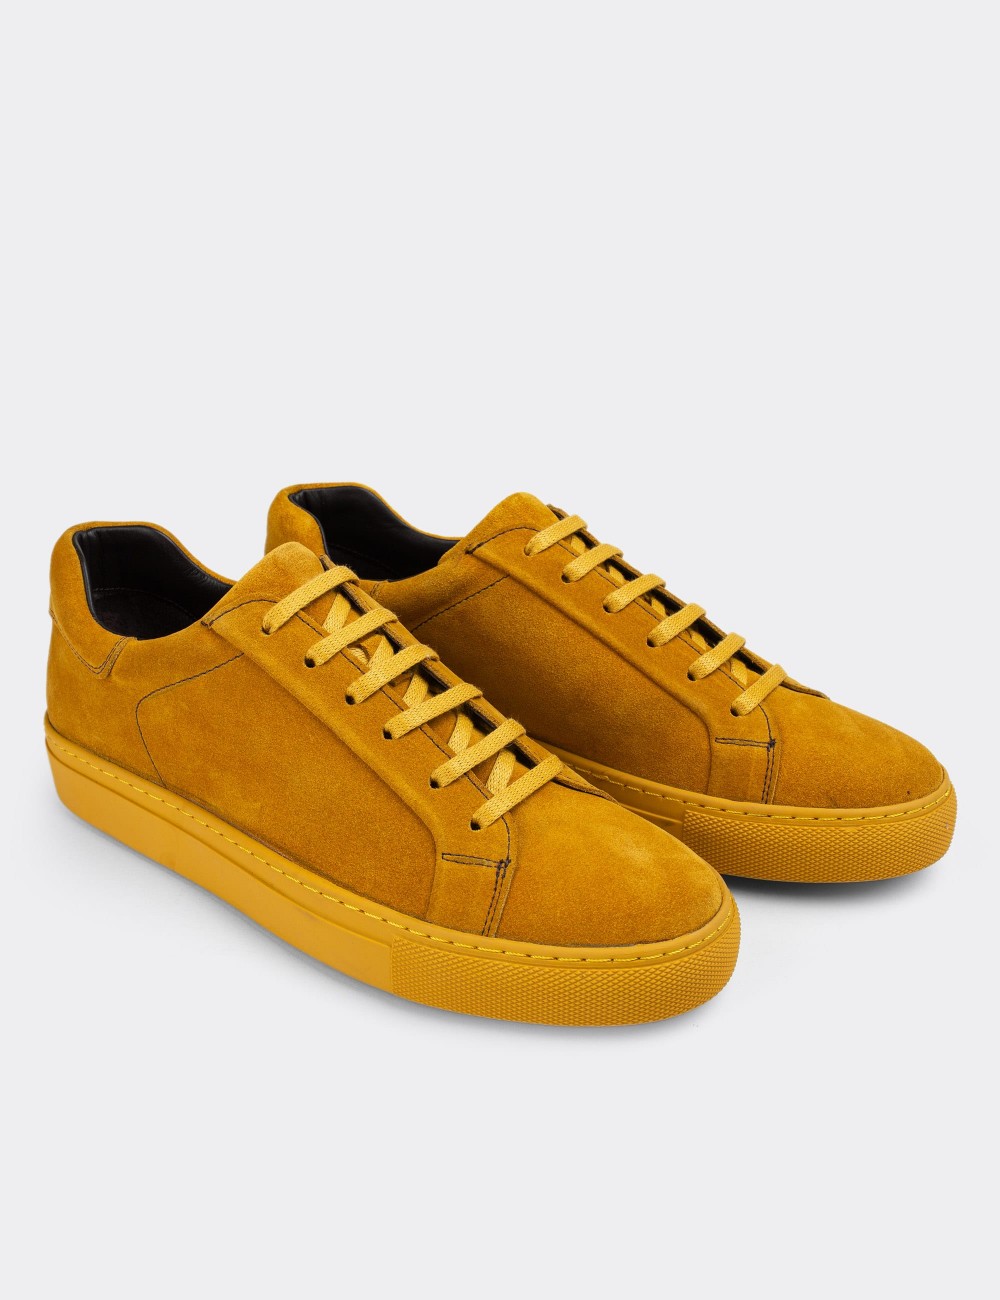 Yellow Suede Leather Sneakers - 01829MSRIC01